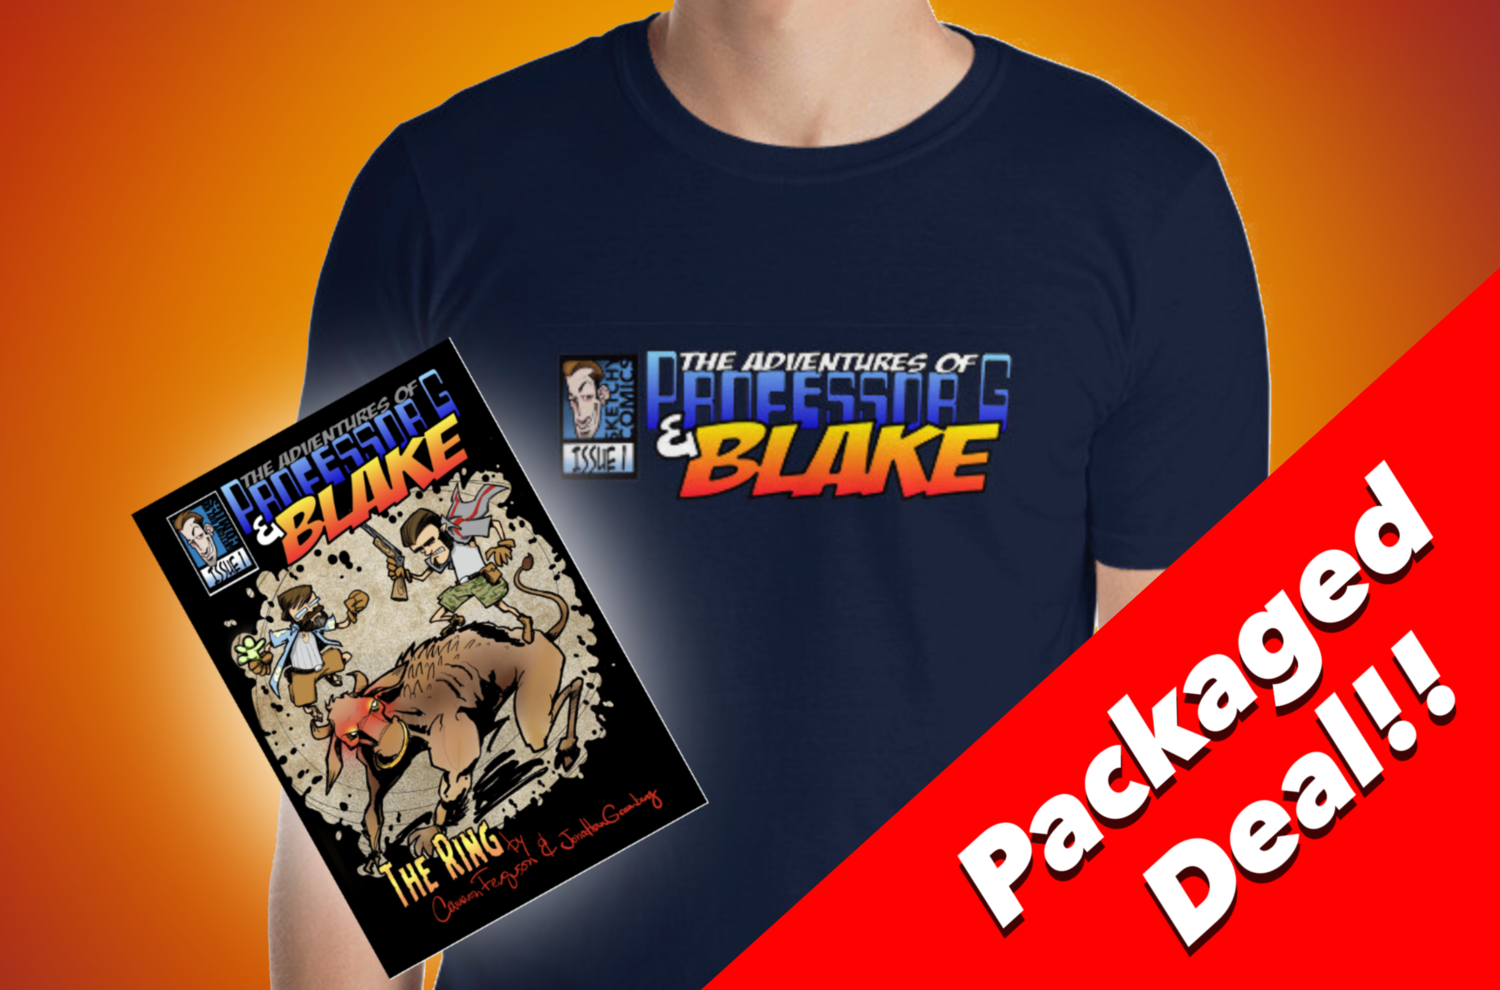 Limited Edition Professor G & Blake Shirt and Signed Comic Deal - Short-Sleeve Unisex T-Shirt & Signed Comic